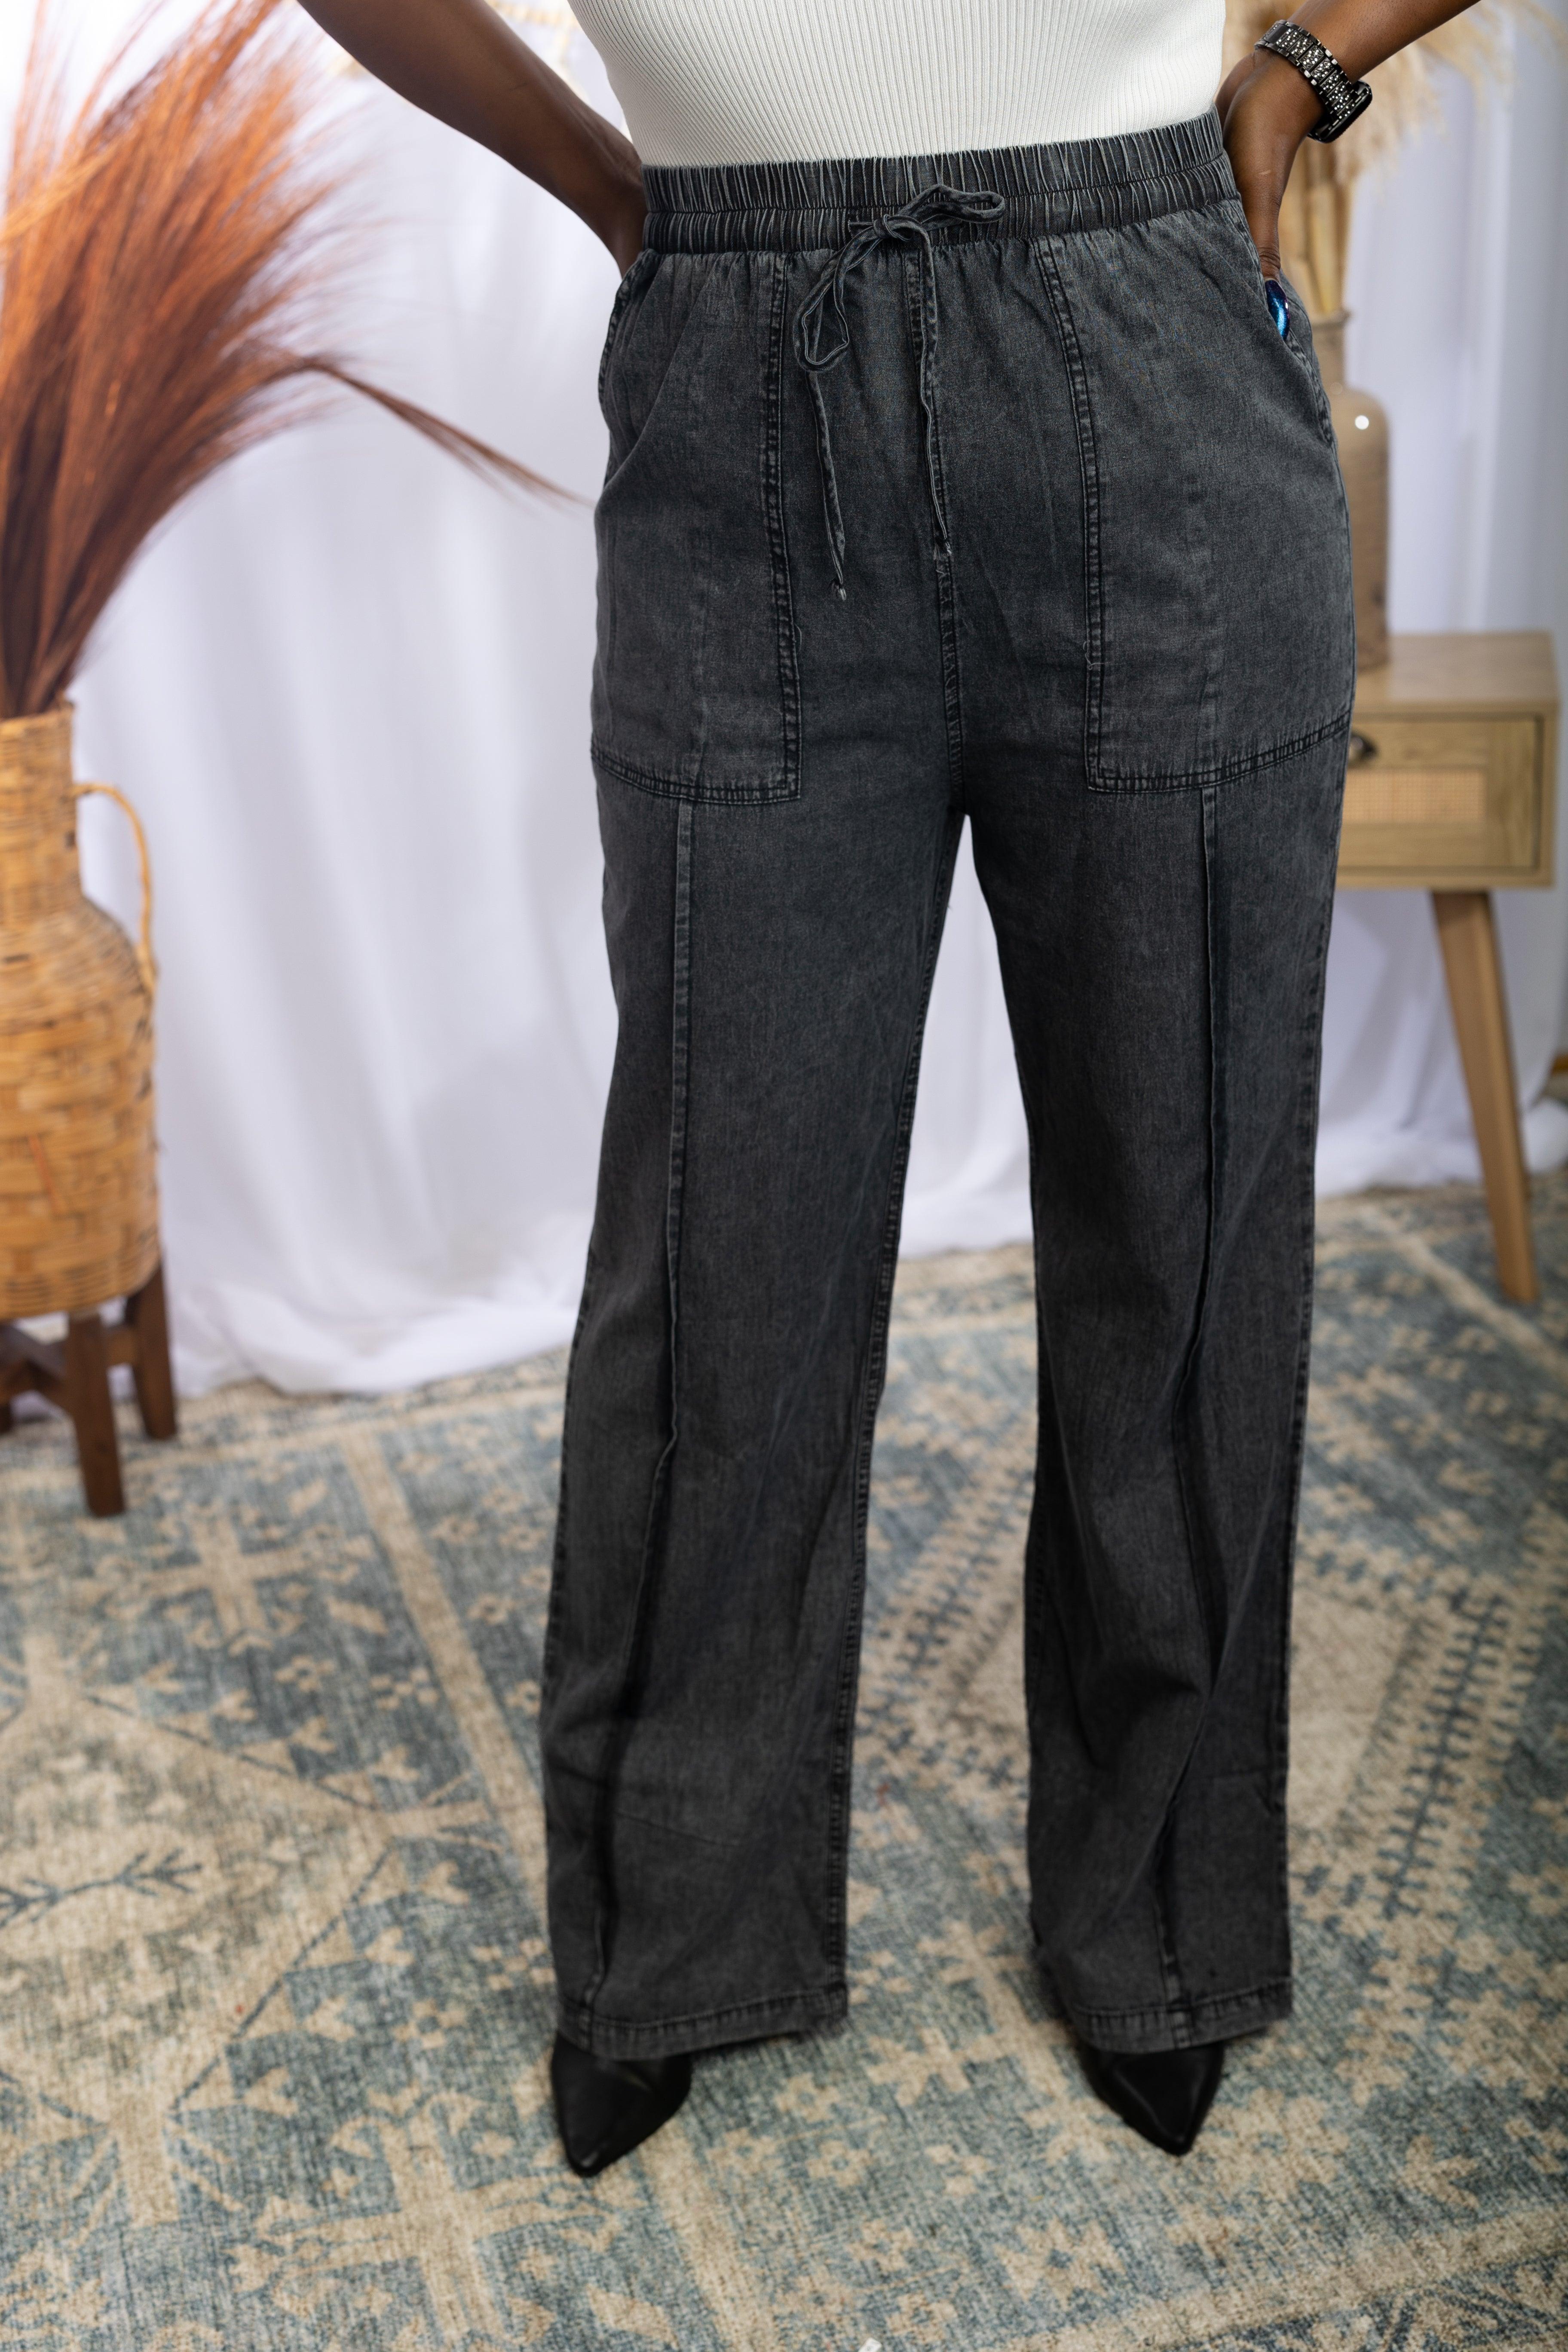 Relax & Unwind - Chambray Pants Giftmas Boutique Simplified   